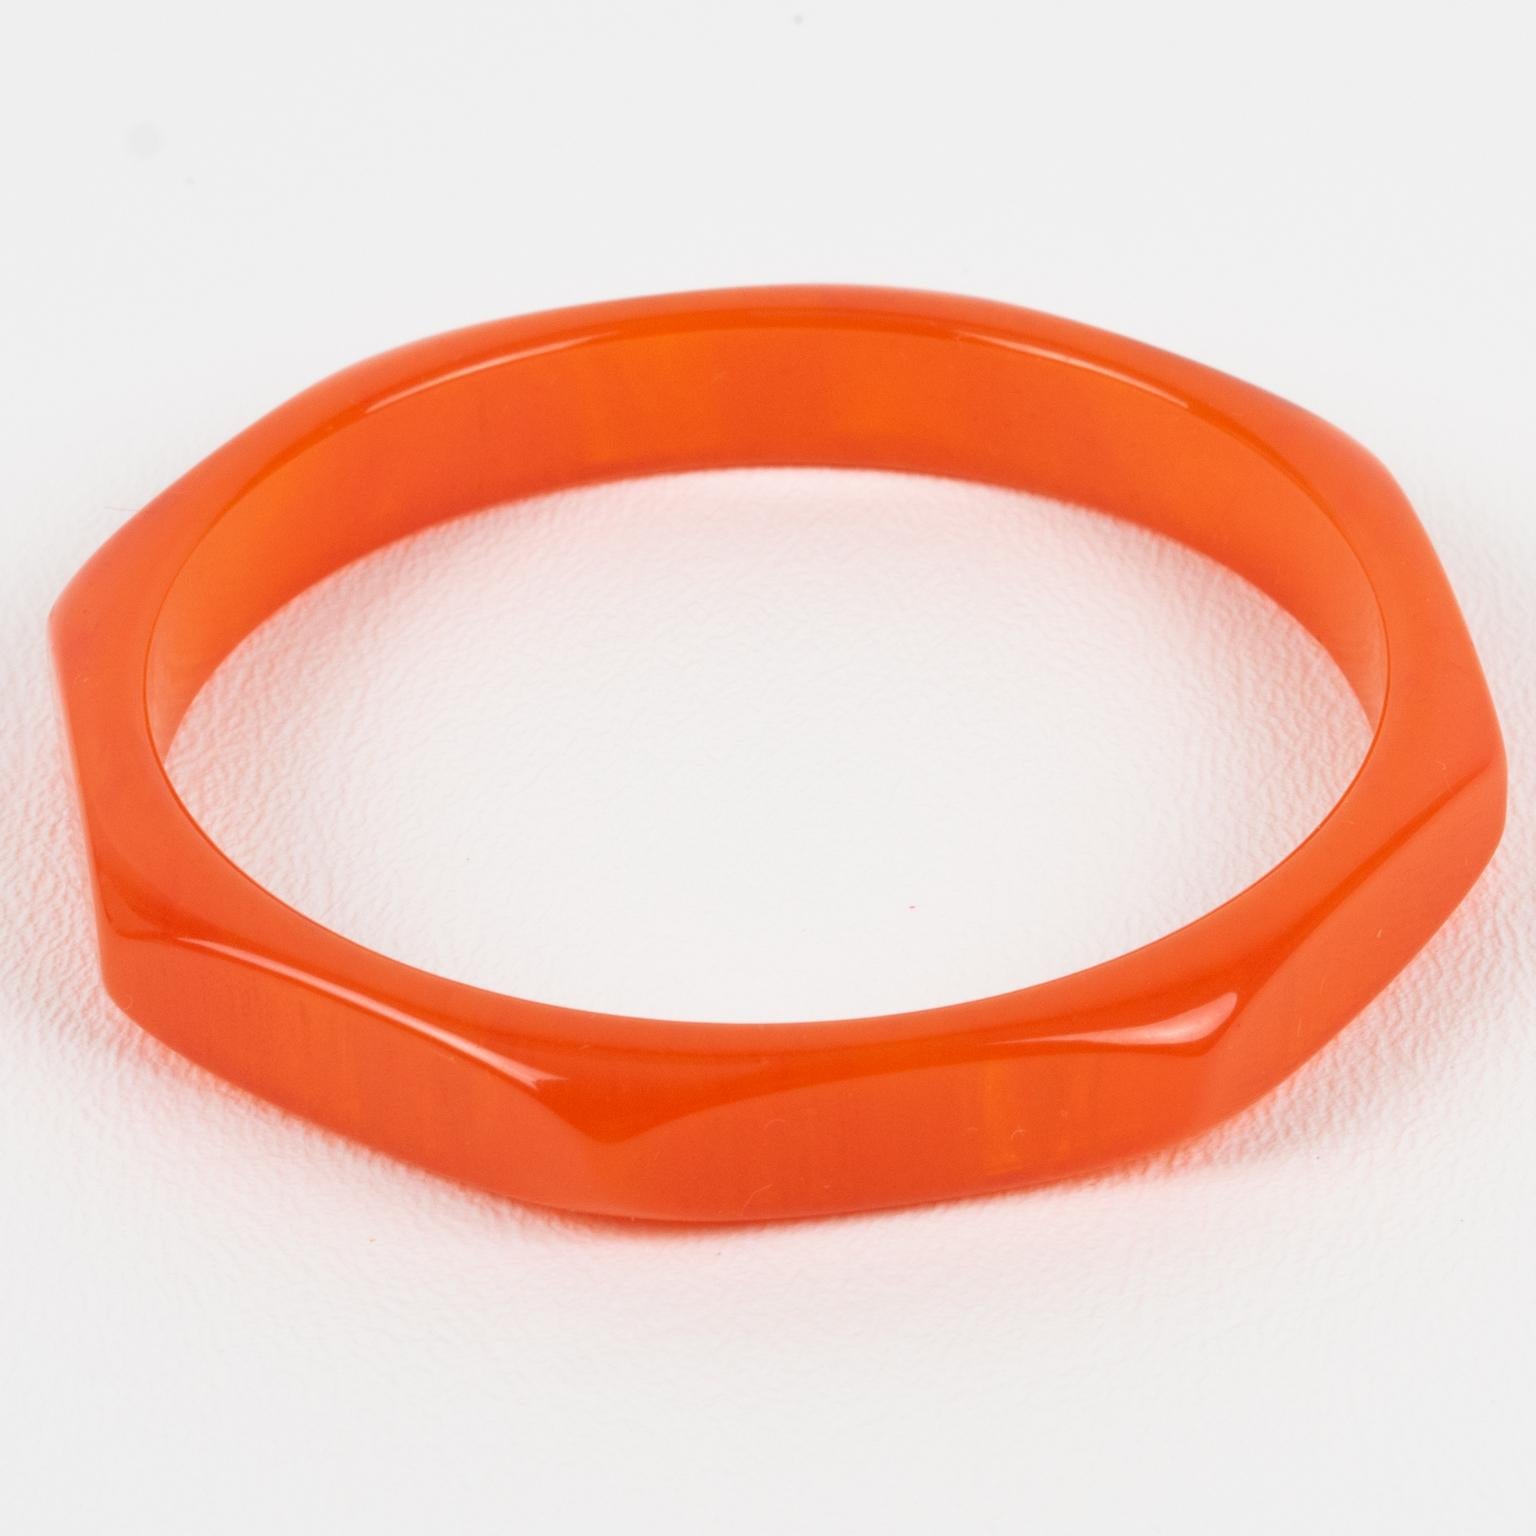 This superb neon orange marble Bakelite bracelet bangle has a chunky octagonal spacer shape with a deeply faceted and carved design. It features an intense bright orange marble color with translucent swirling.
Measurements: Inside across is 2.50 in